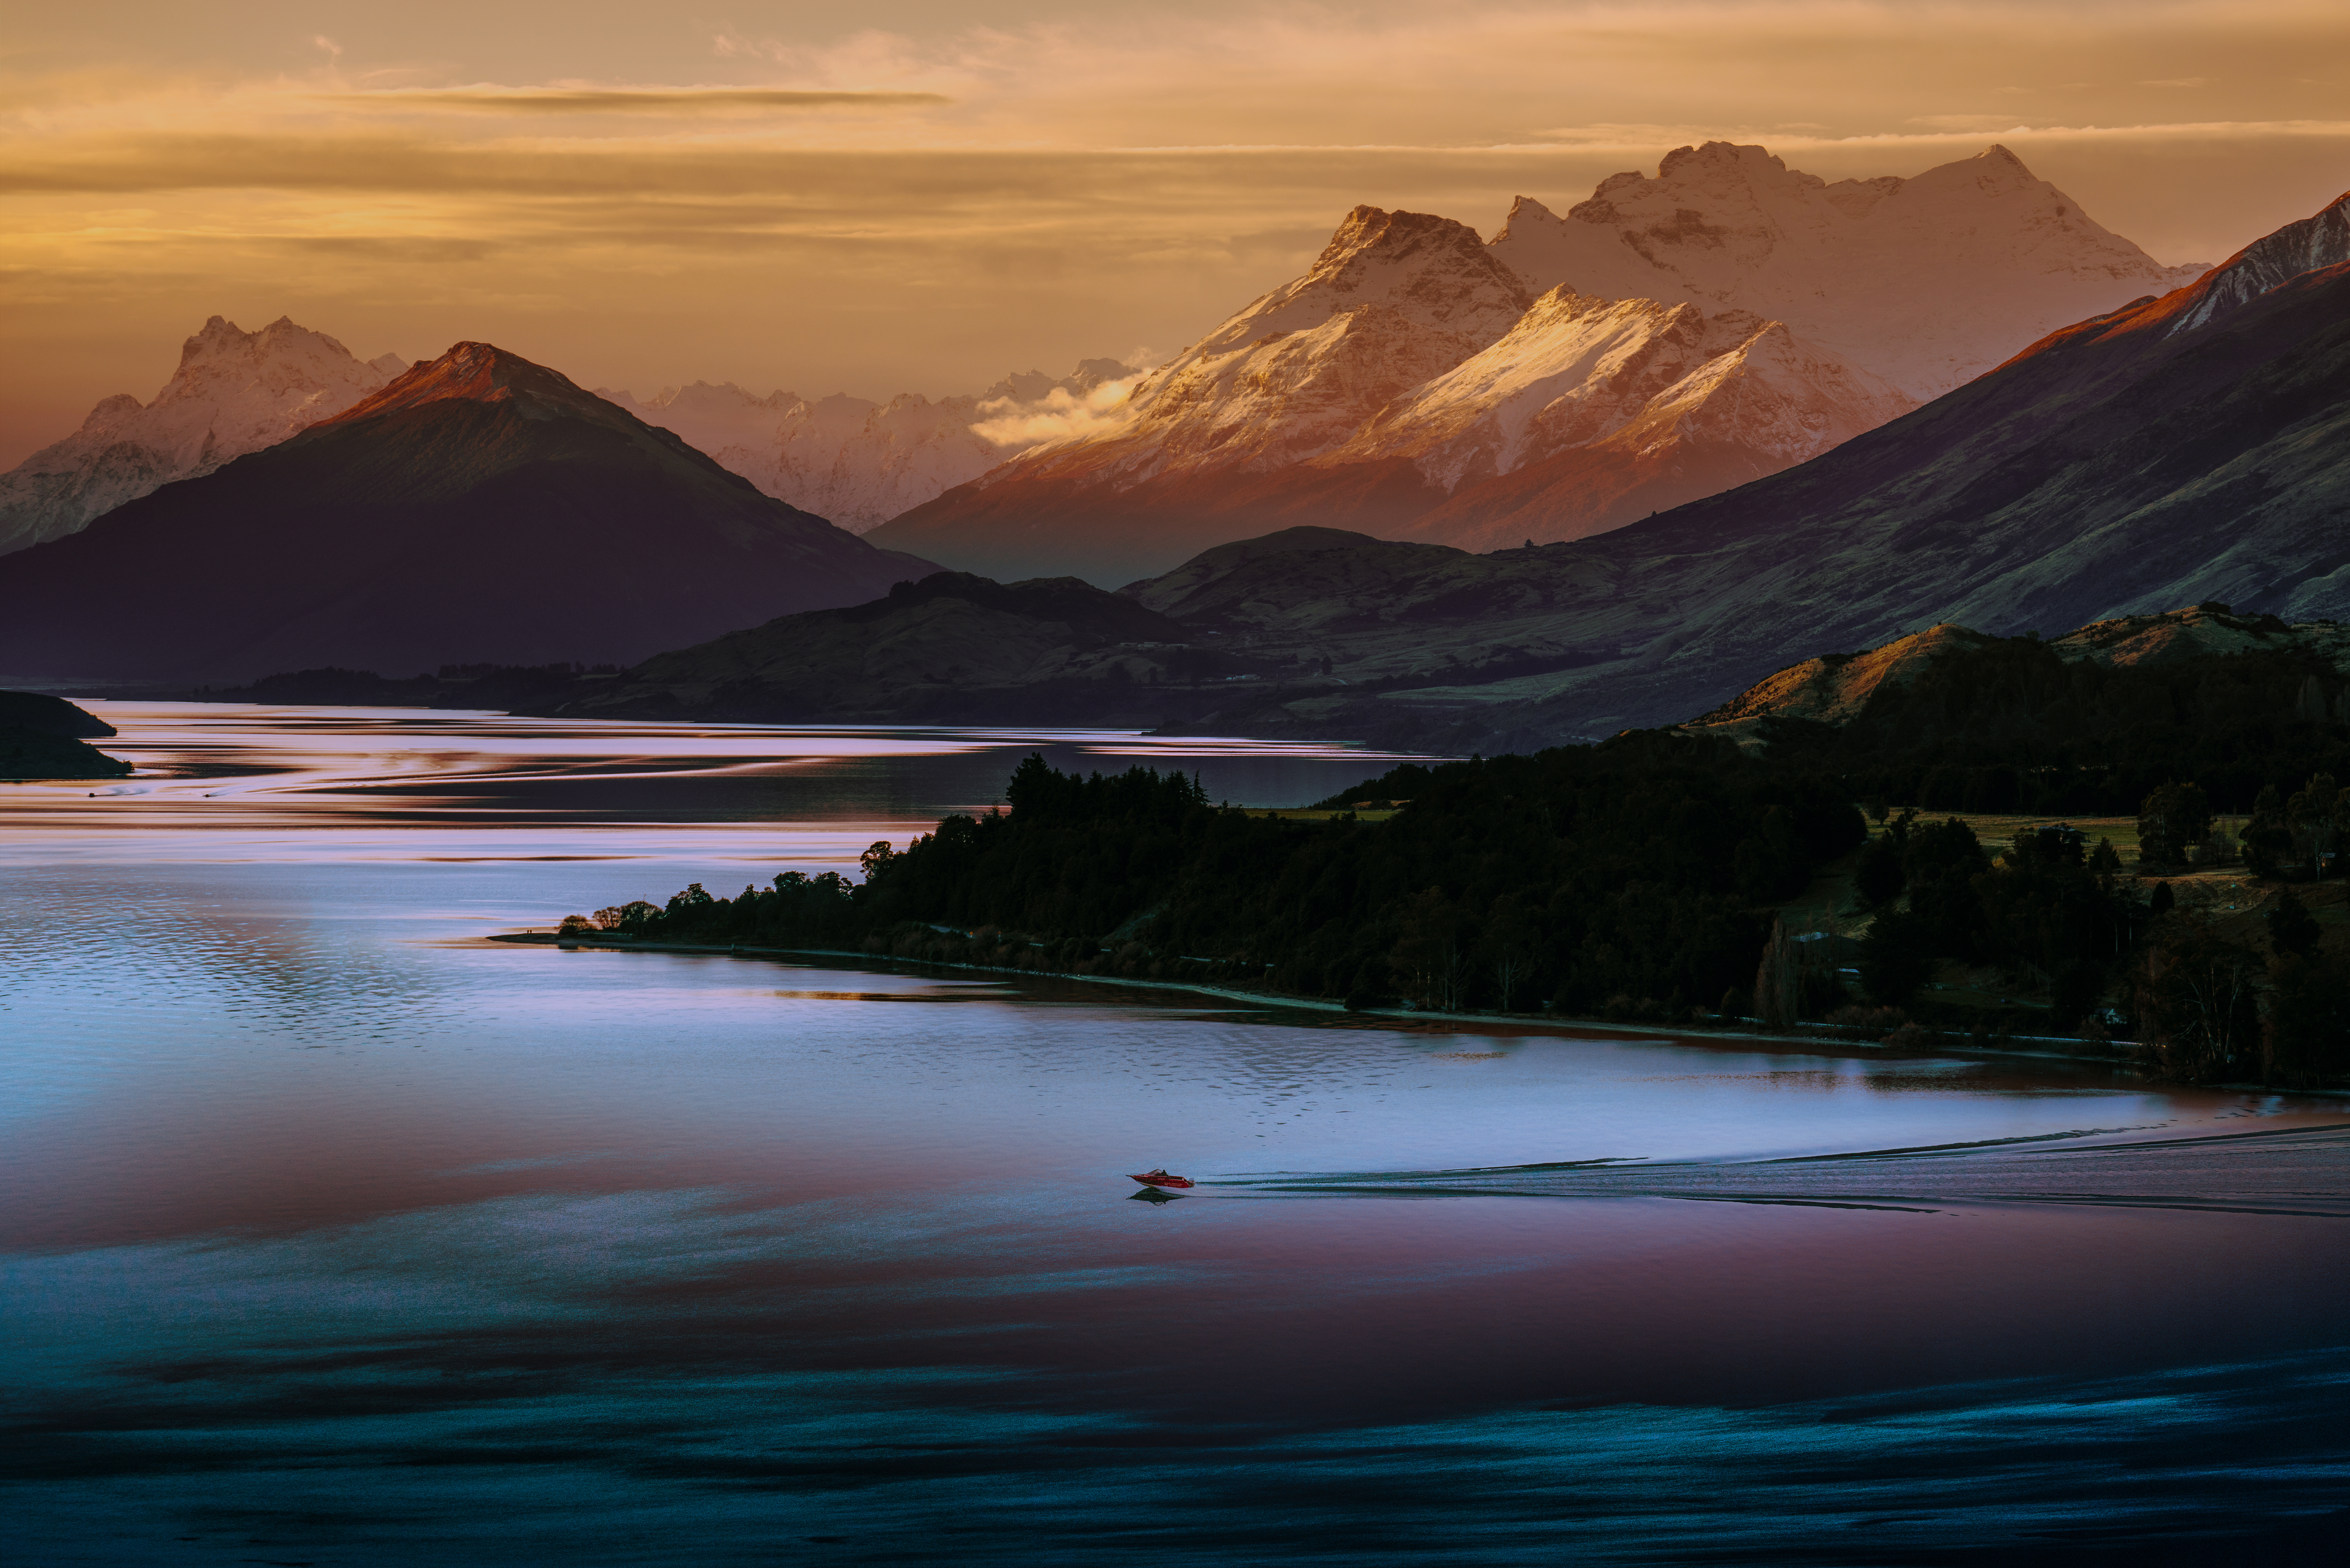 New Zealand Queenstown Lake Nature Landscape Mountains Sunset Photography Forest Trees Water 7157x4775